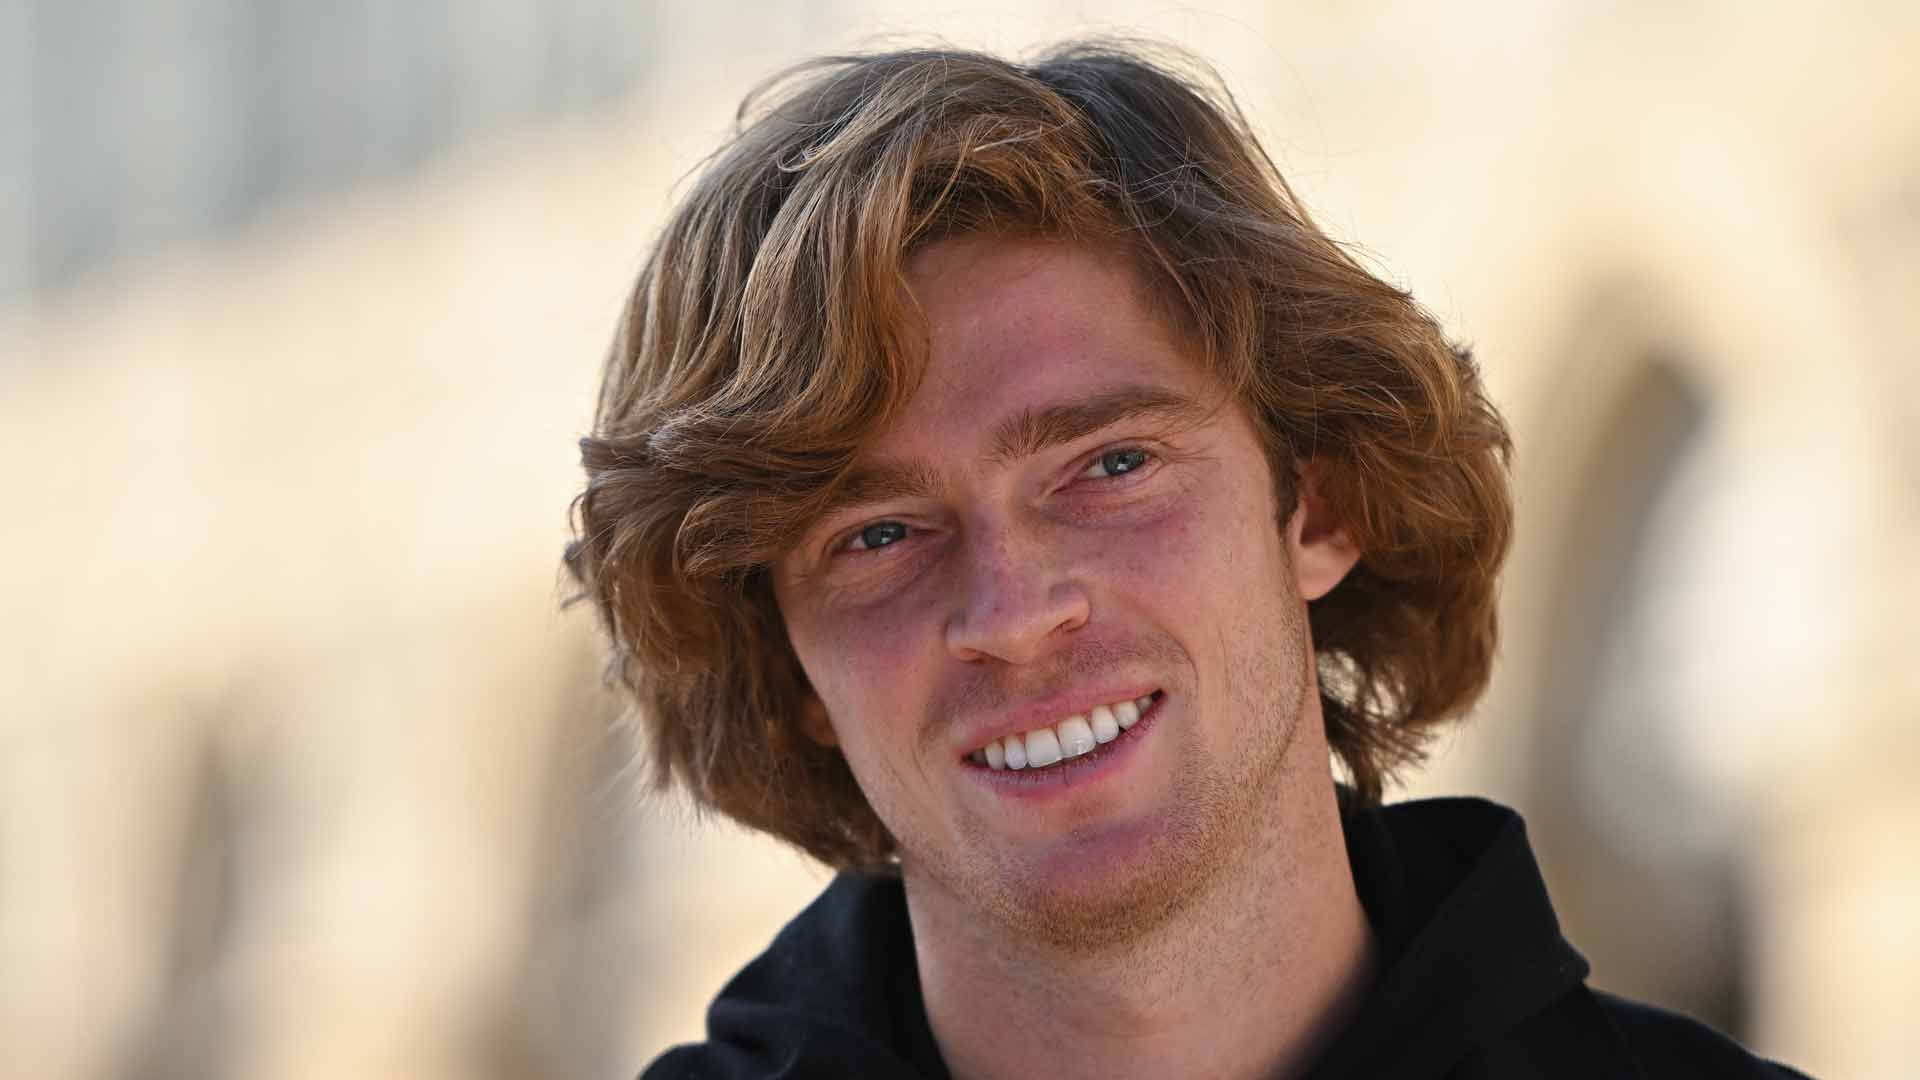 Andrey Rublev at the 2022 Nitto ATP Finals media day.